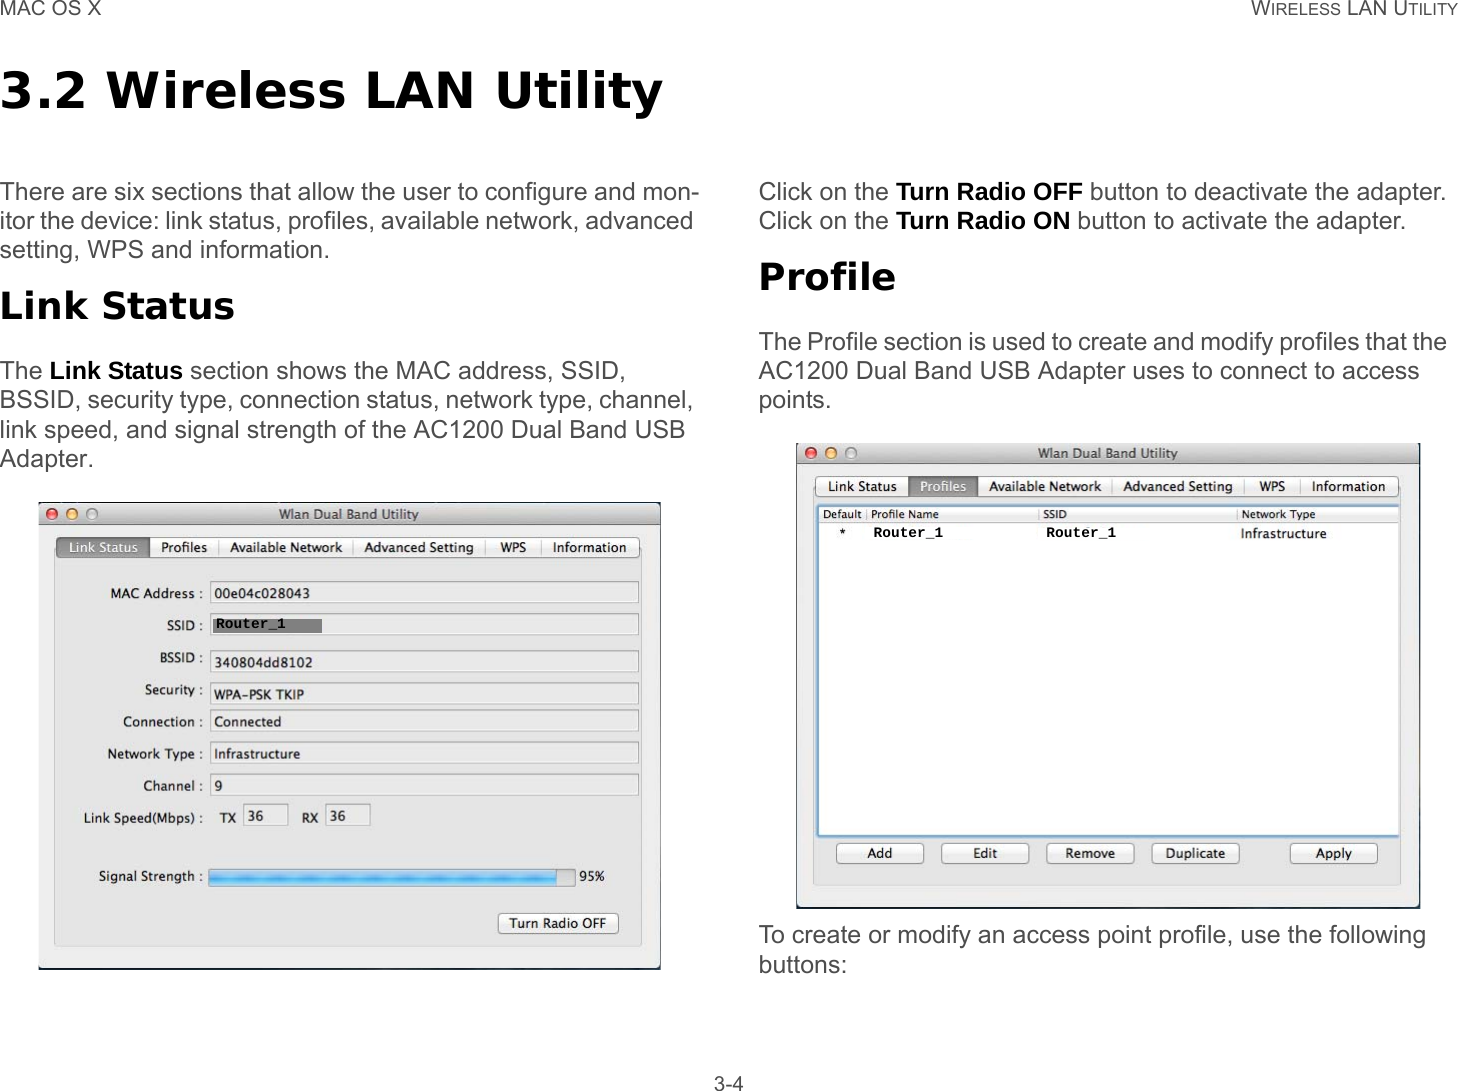 MAC OS X WIRELESS LAN UTILITY 3-43.2 Wireless LAN UtilityThere are six sections that allow the user to configure and mon-itor the device: link status, profiles, available network, advanced setting, WPS and information.Link StatusThe Link Status section shows the MAC address, SSID, BSSID, security type, connection status, network type, channel, link speed, and signal strength of the AC1200 Dual Band USB Adapter.Click on the Turn Radio OFF button to deactivate the adapter. Click on the Turn Radio ON button to activate the adapter.ProfileThe Profile section is used to create and modify profiles that the  AC1200 Dual Band USB Adapter uses to connect to access points.To create or modify an access point profile, use the following buttons:Router_1Router_1 Router_1